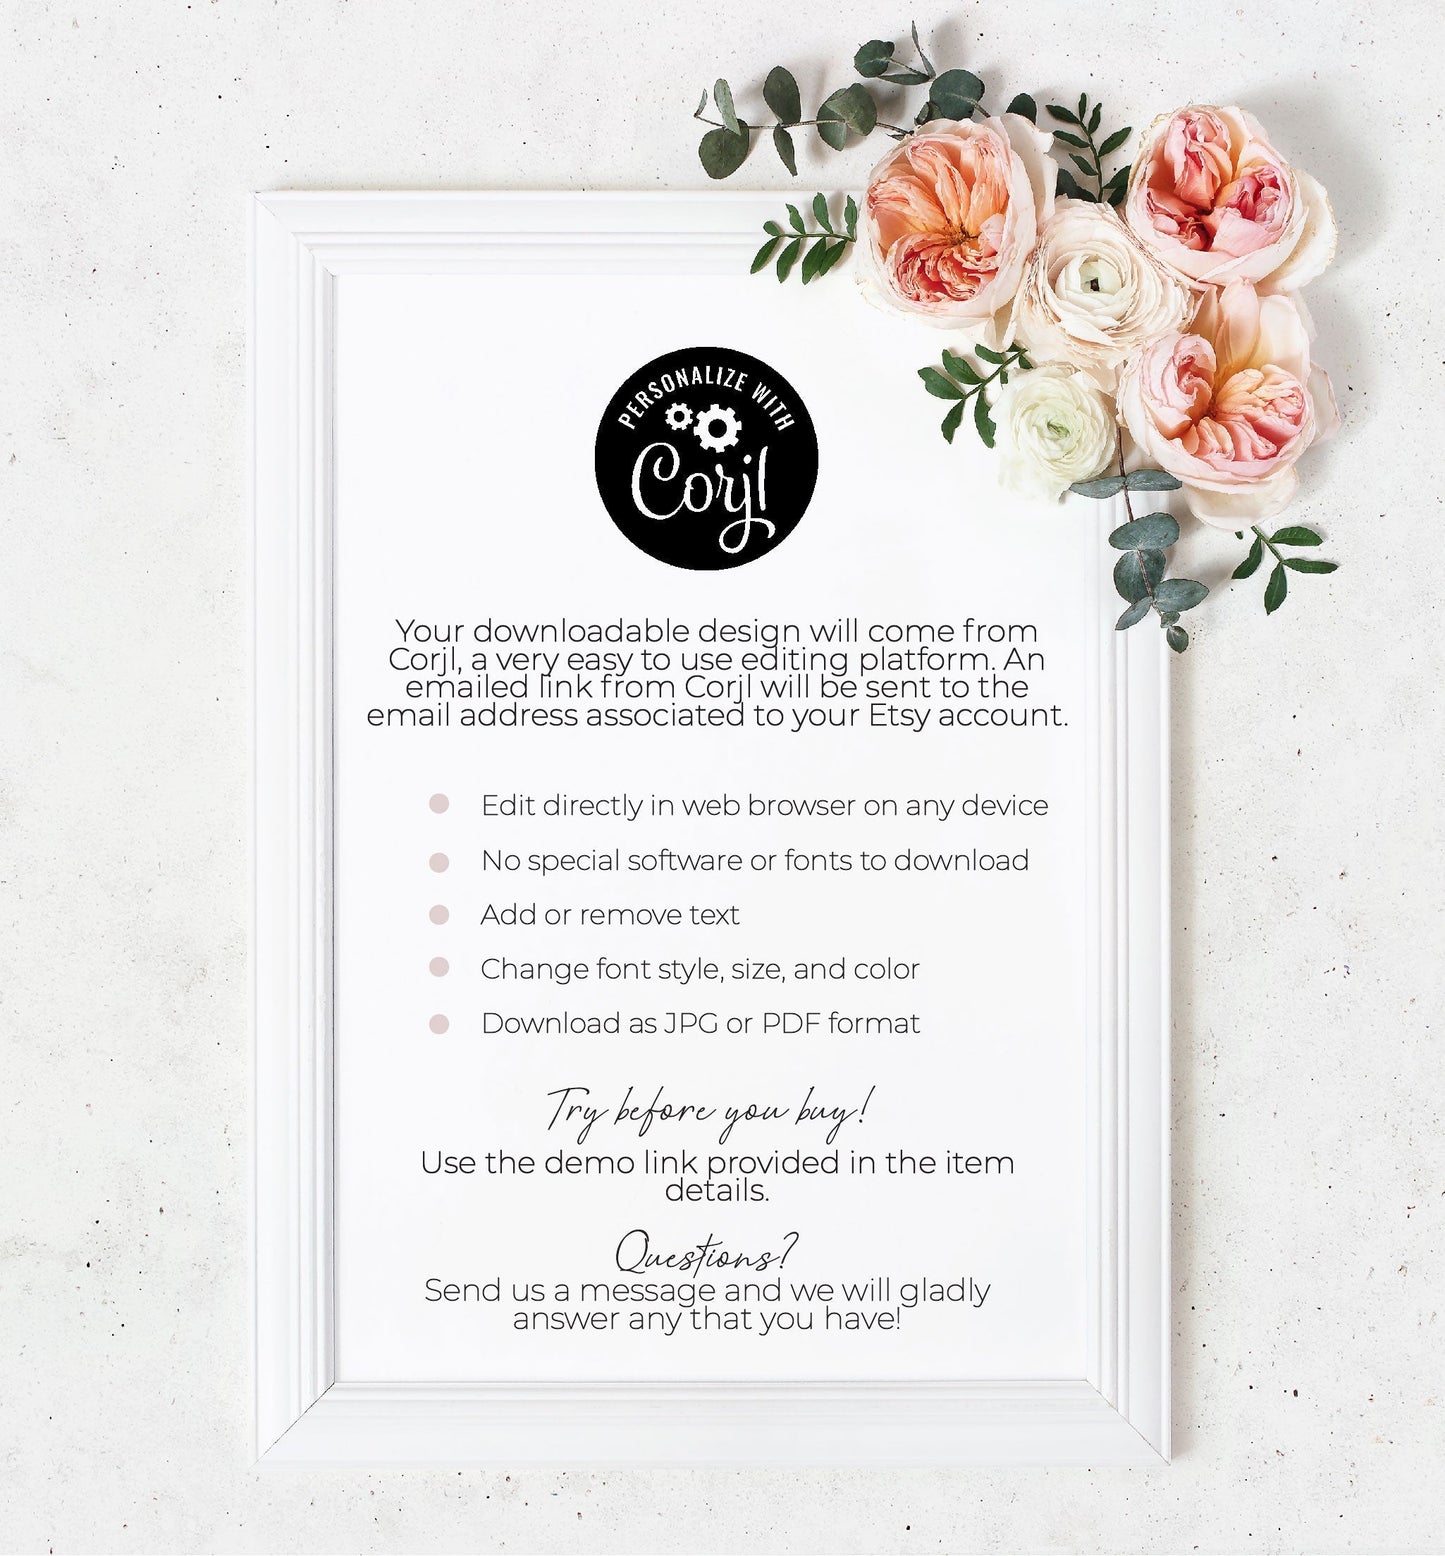 Wedding Save the Date (Have Yourself A Marry Little Christmas) - Digital Download